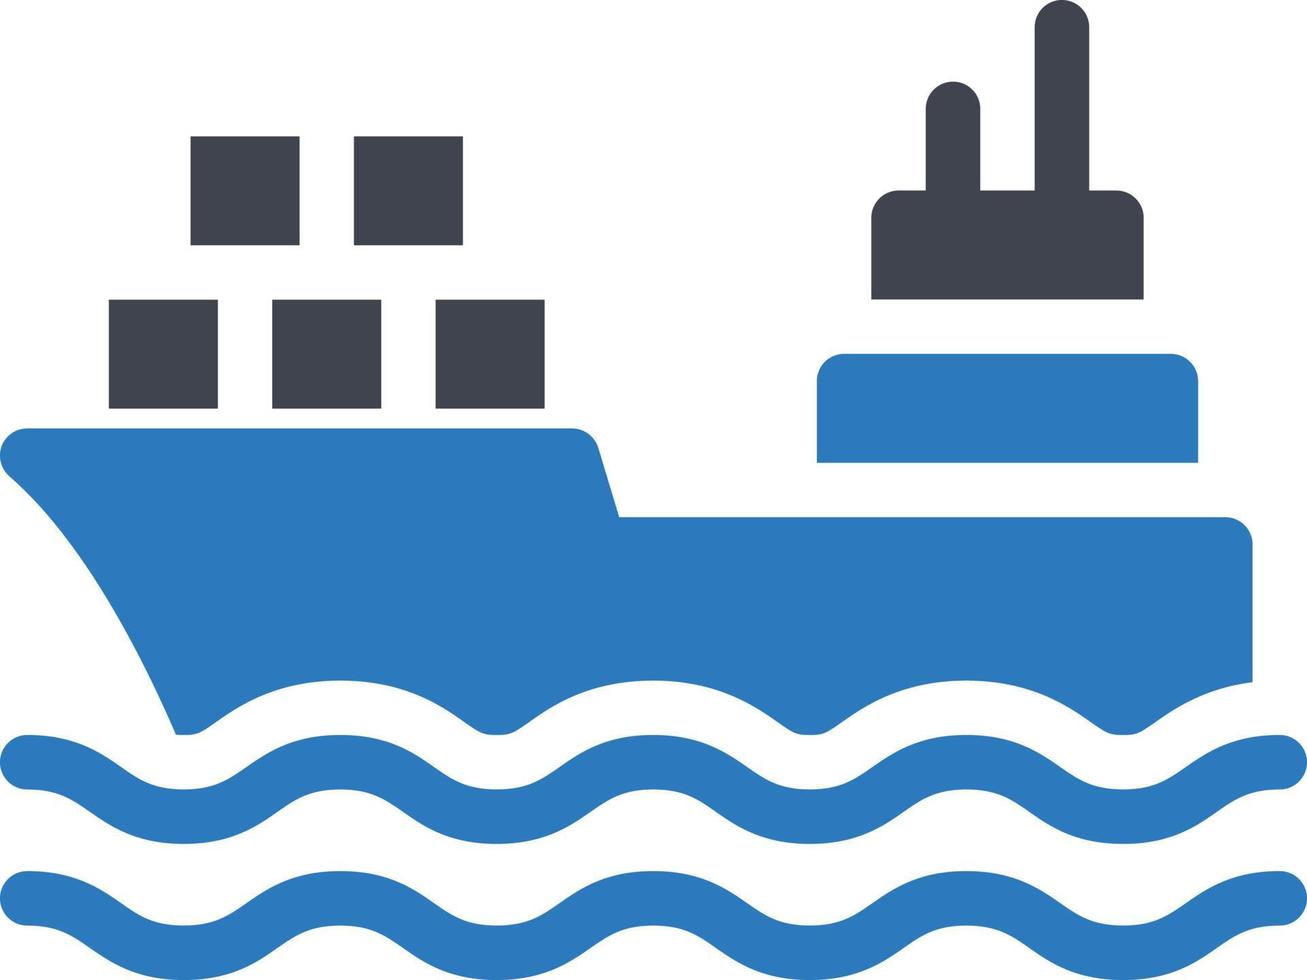 Ship vector illustration on a background.Premium quality symbols.vector icons for concept and graphic design.